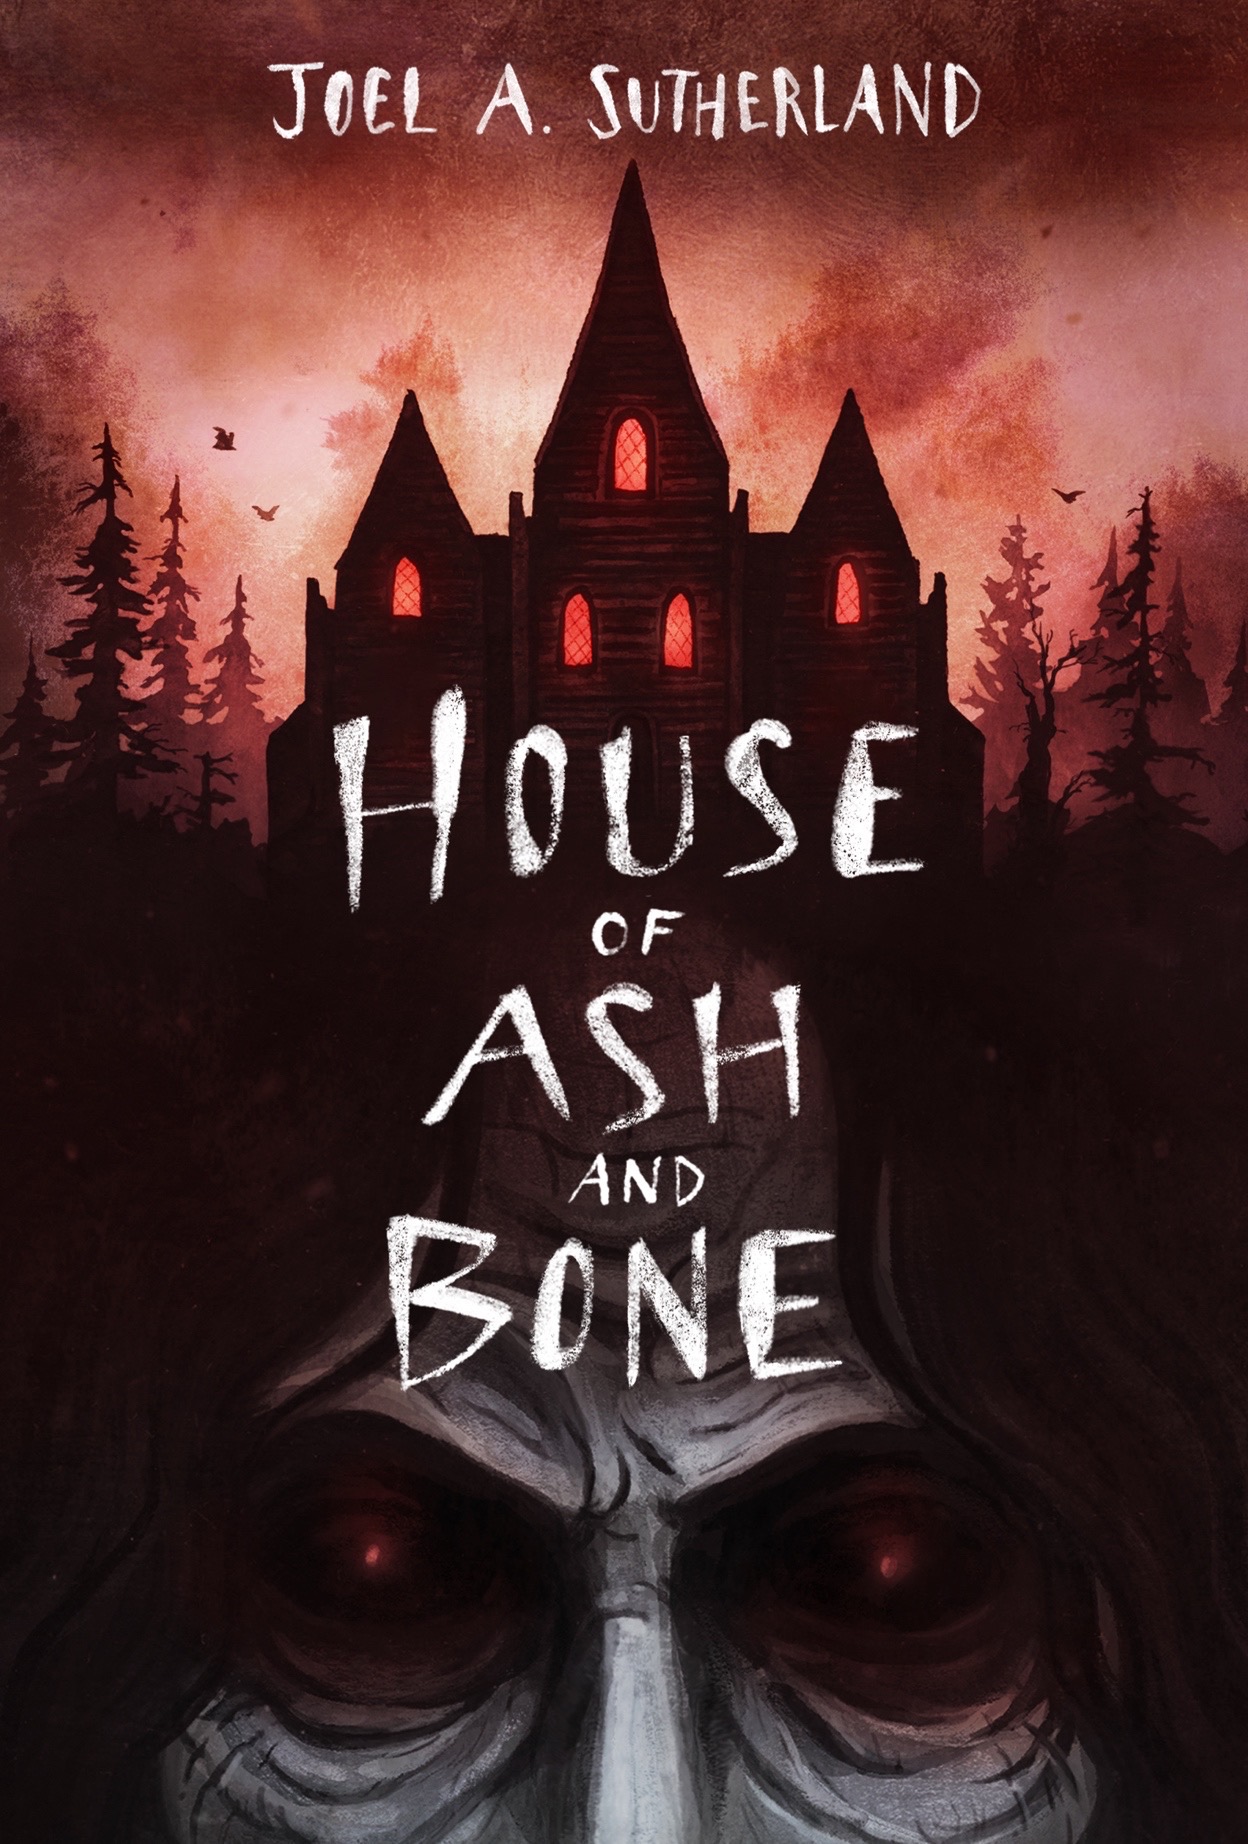 Front cover image of House of Ash and Bone house in a silhouette in front of a red sky with a woman with no eyes, grey skin in the foreground